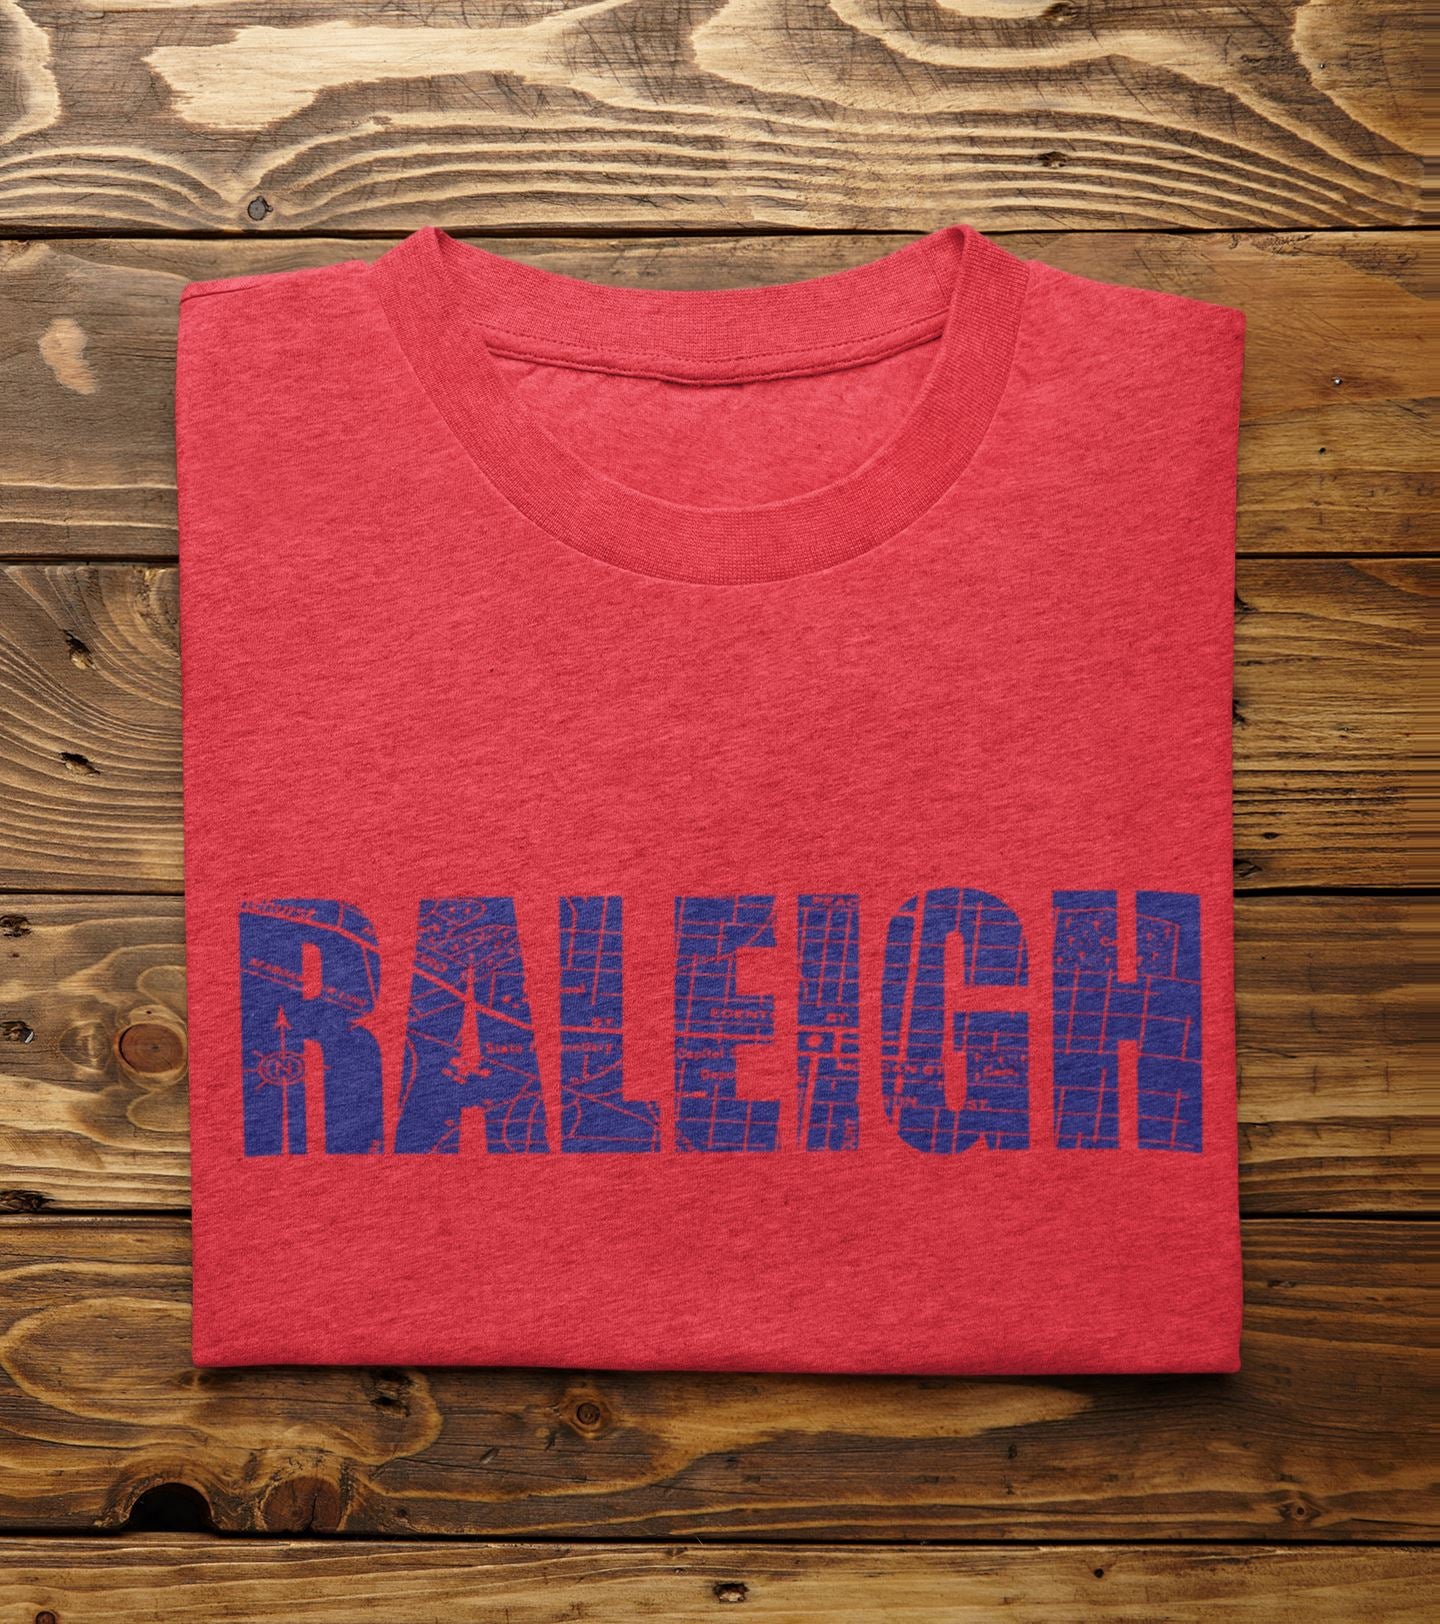 Raleigh Streets Shirt - House of Swank